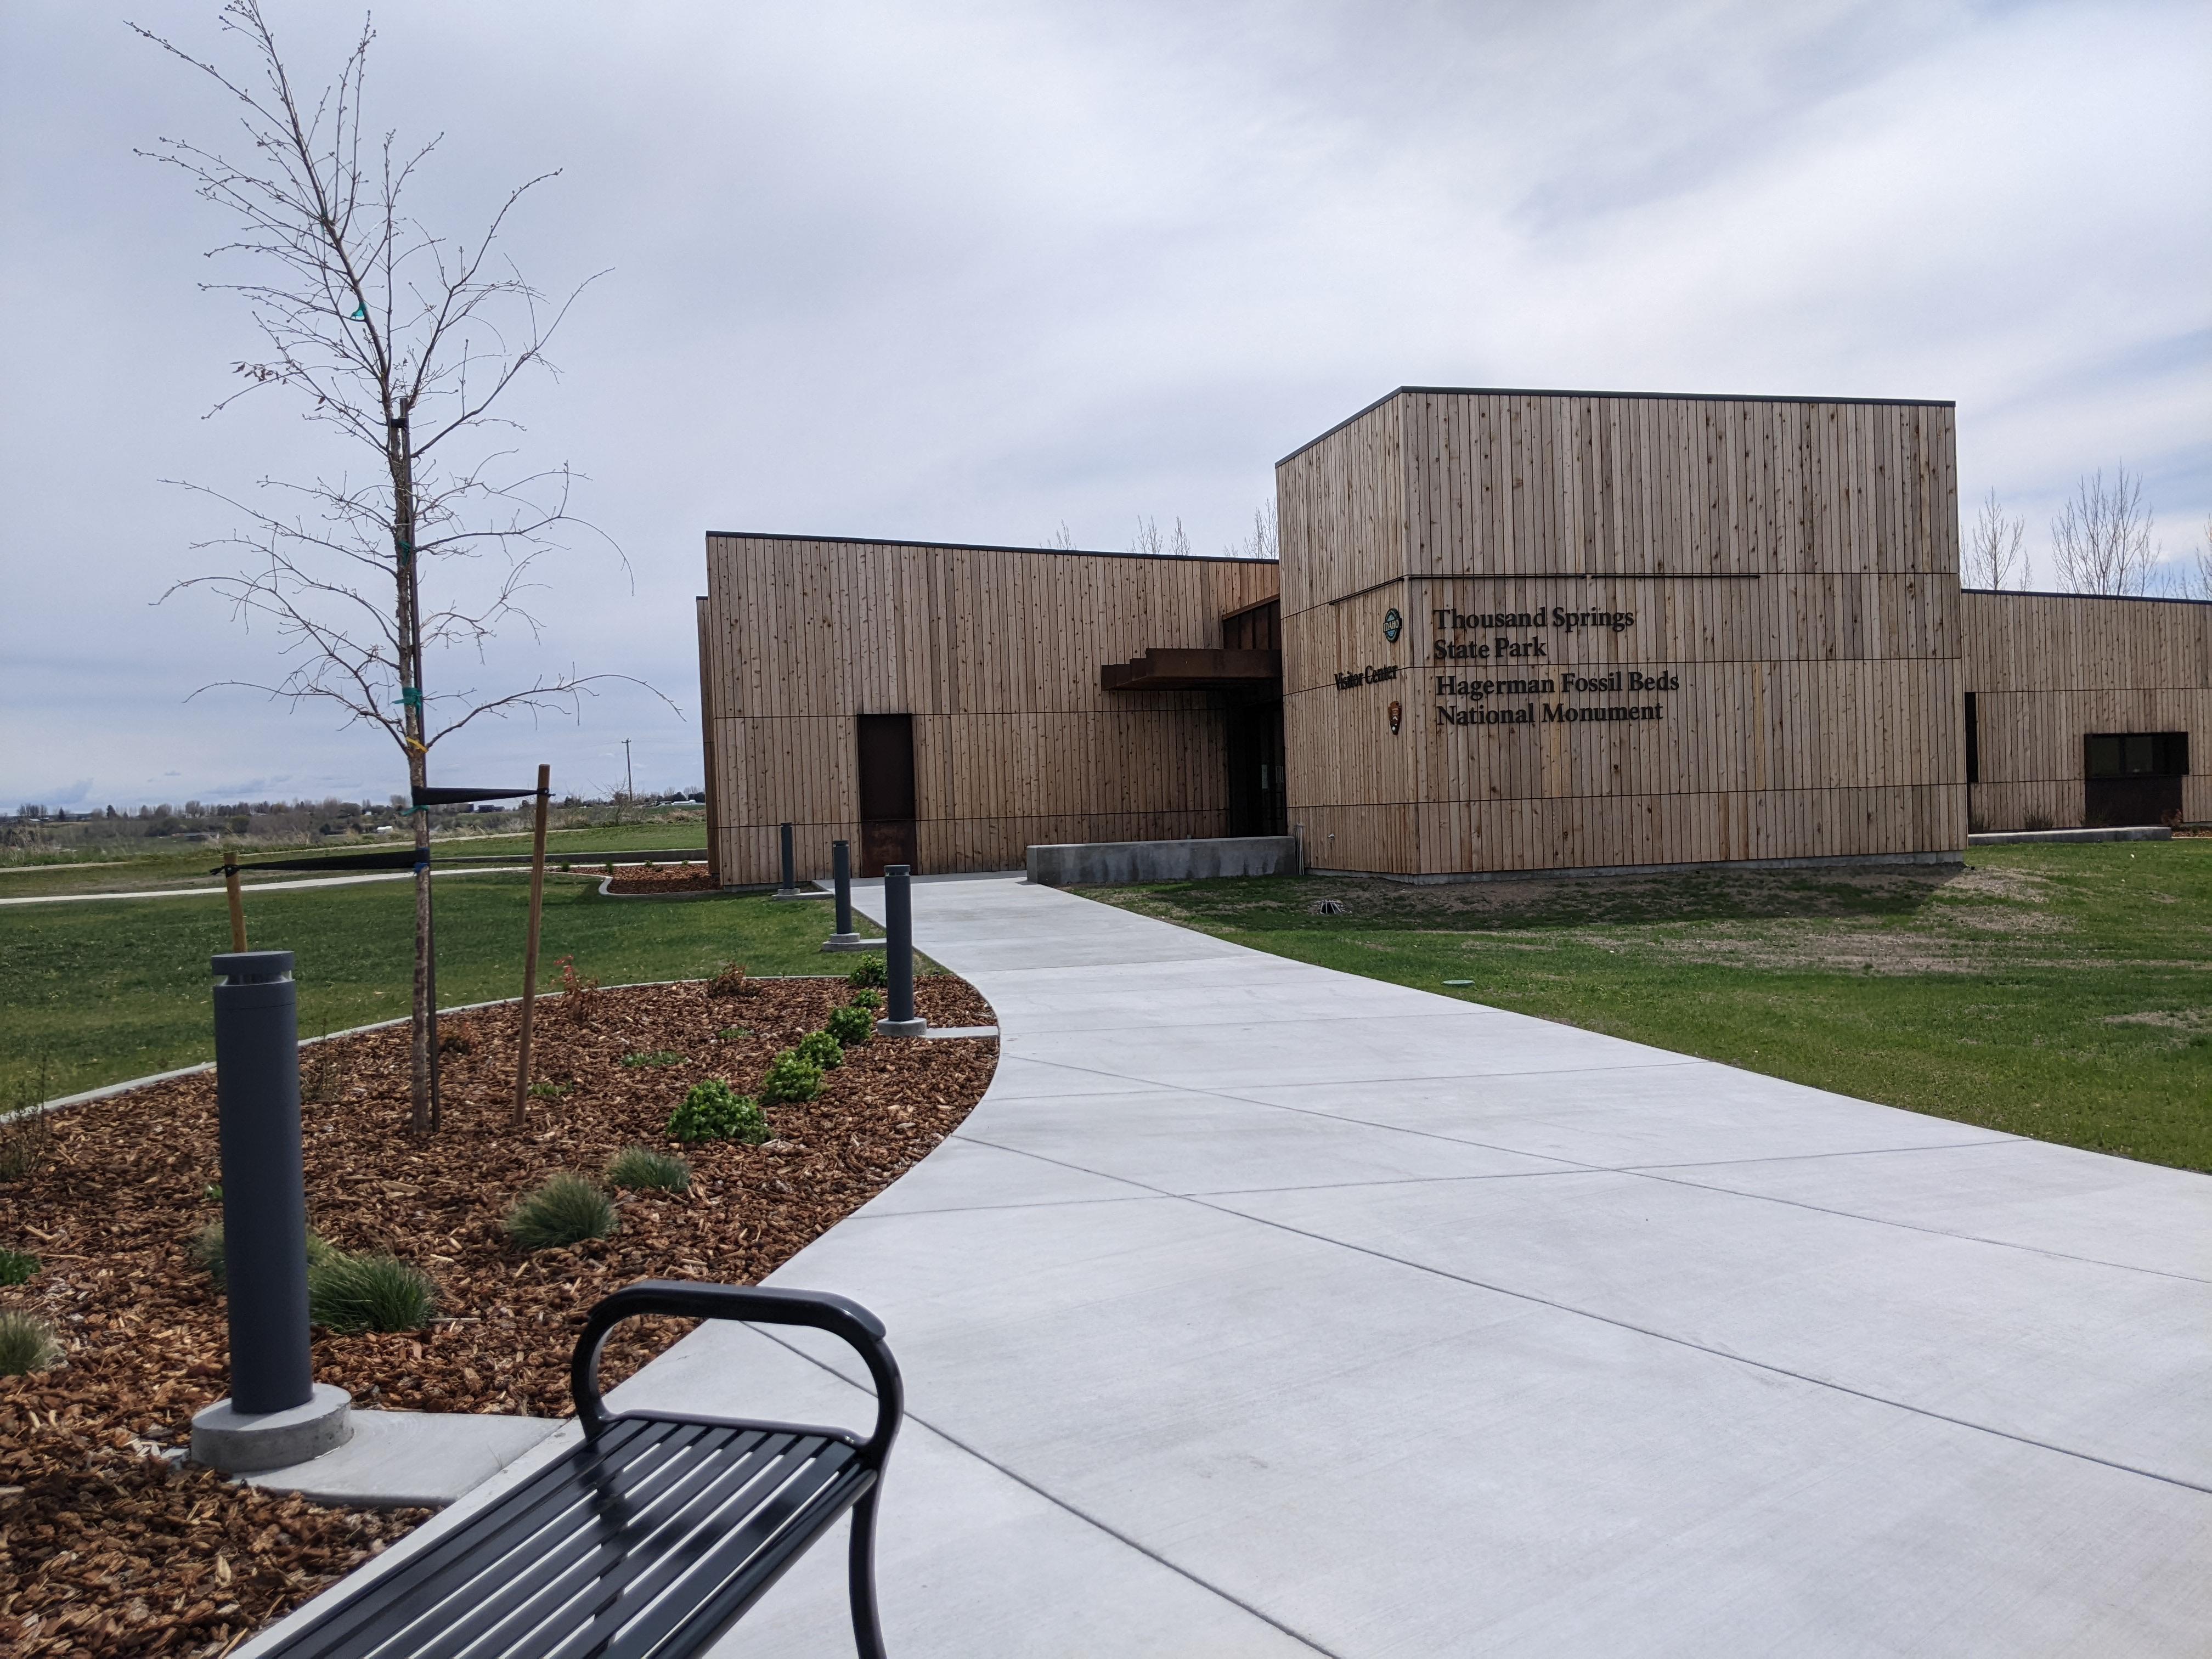 A sidewalk leads to a boxy, wood-paneled building labelled as "visitor center"